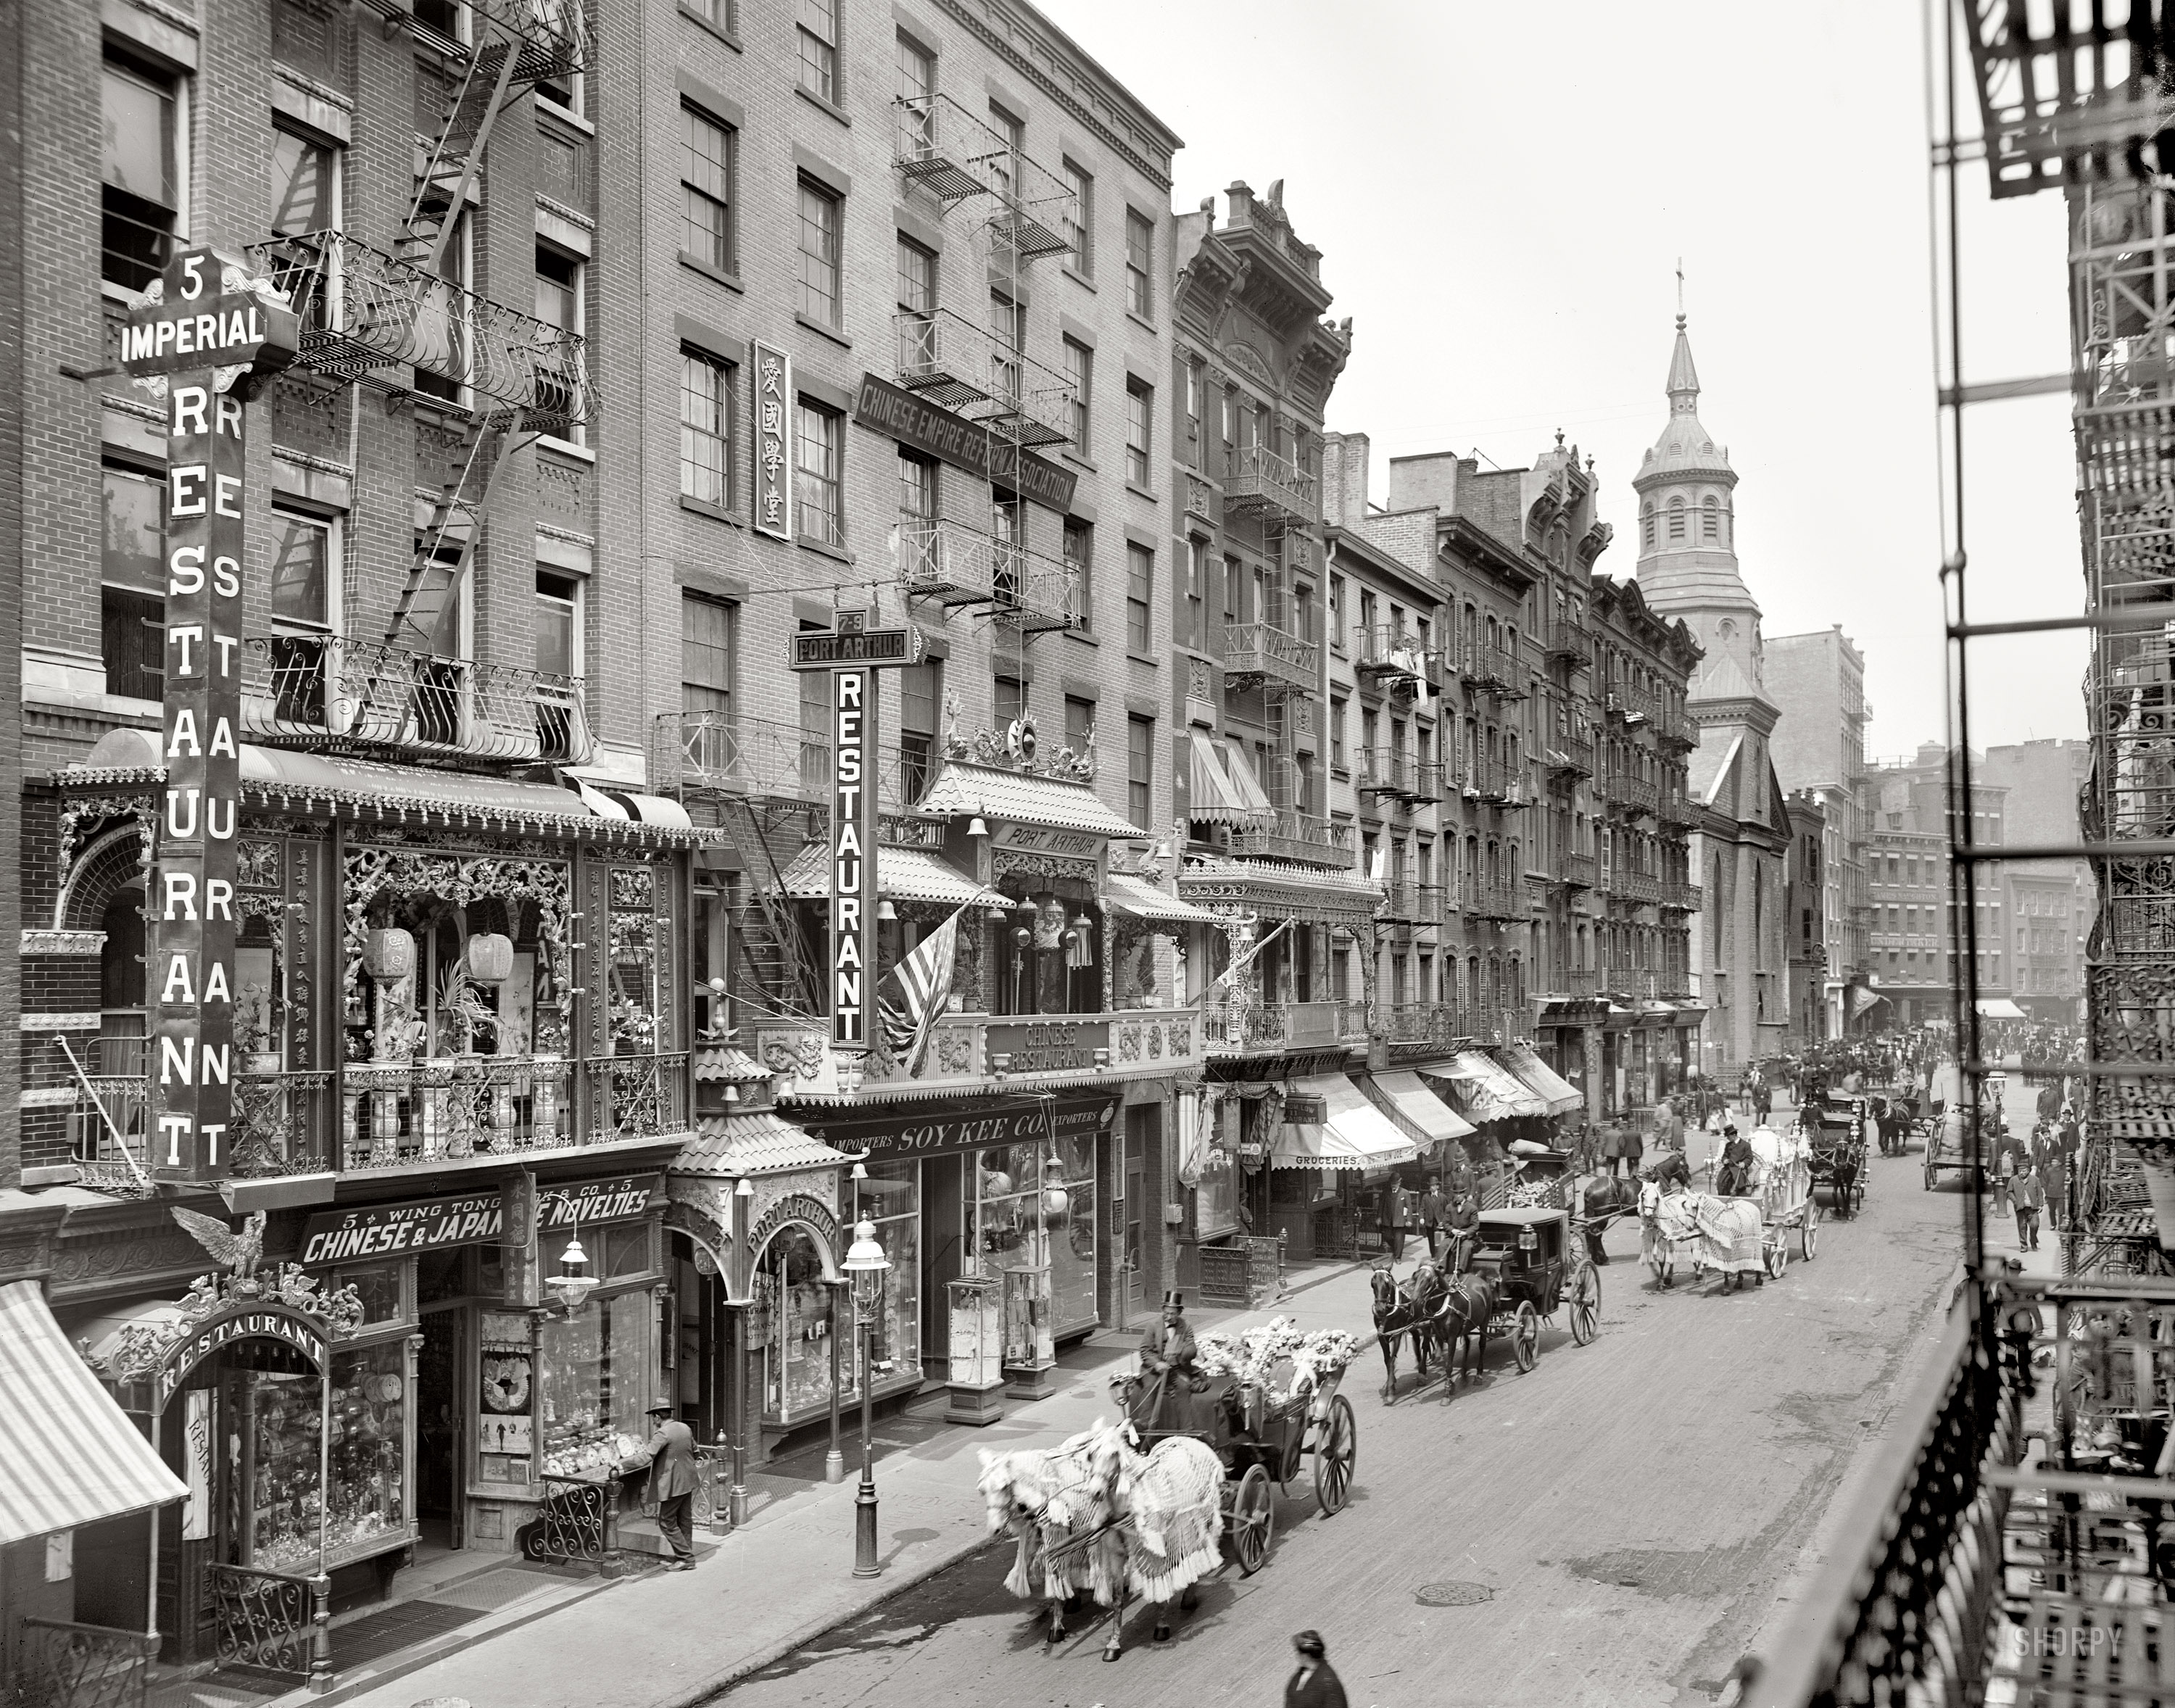 New York City circa 1905. "Funeral procession on Mott Street." 8x10 inch dry plate glass negative, Detroit Publishing Company. View full size.